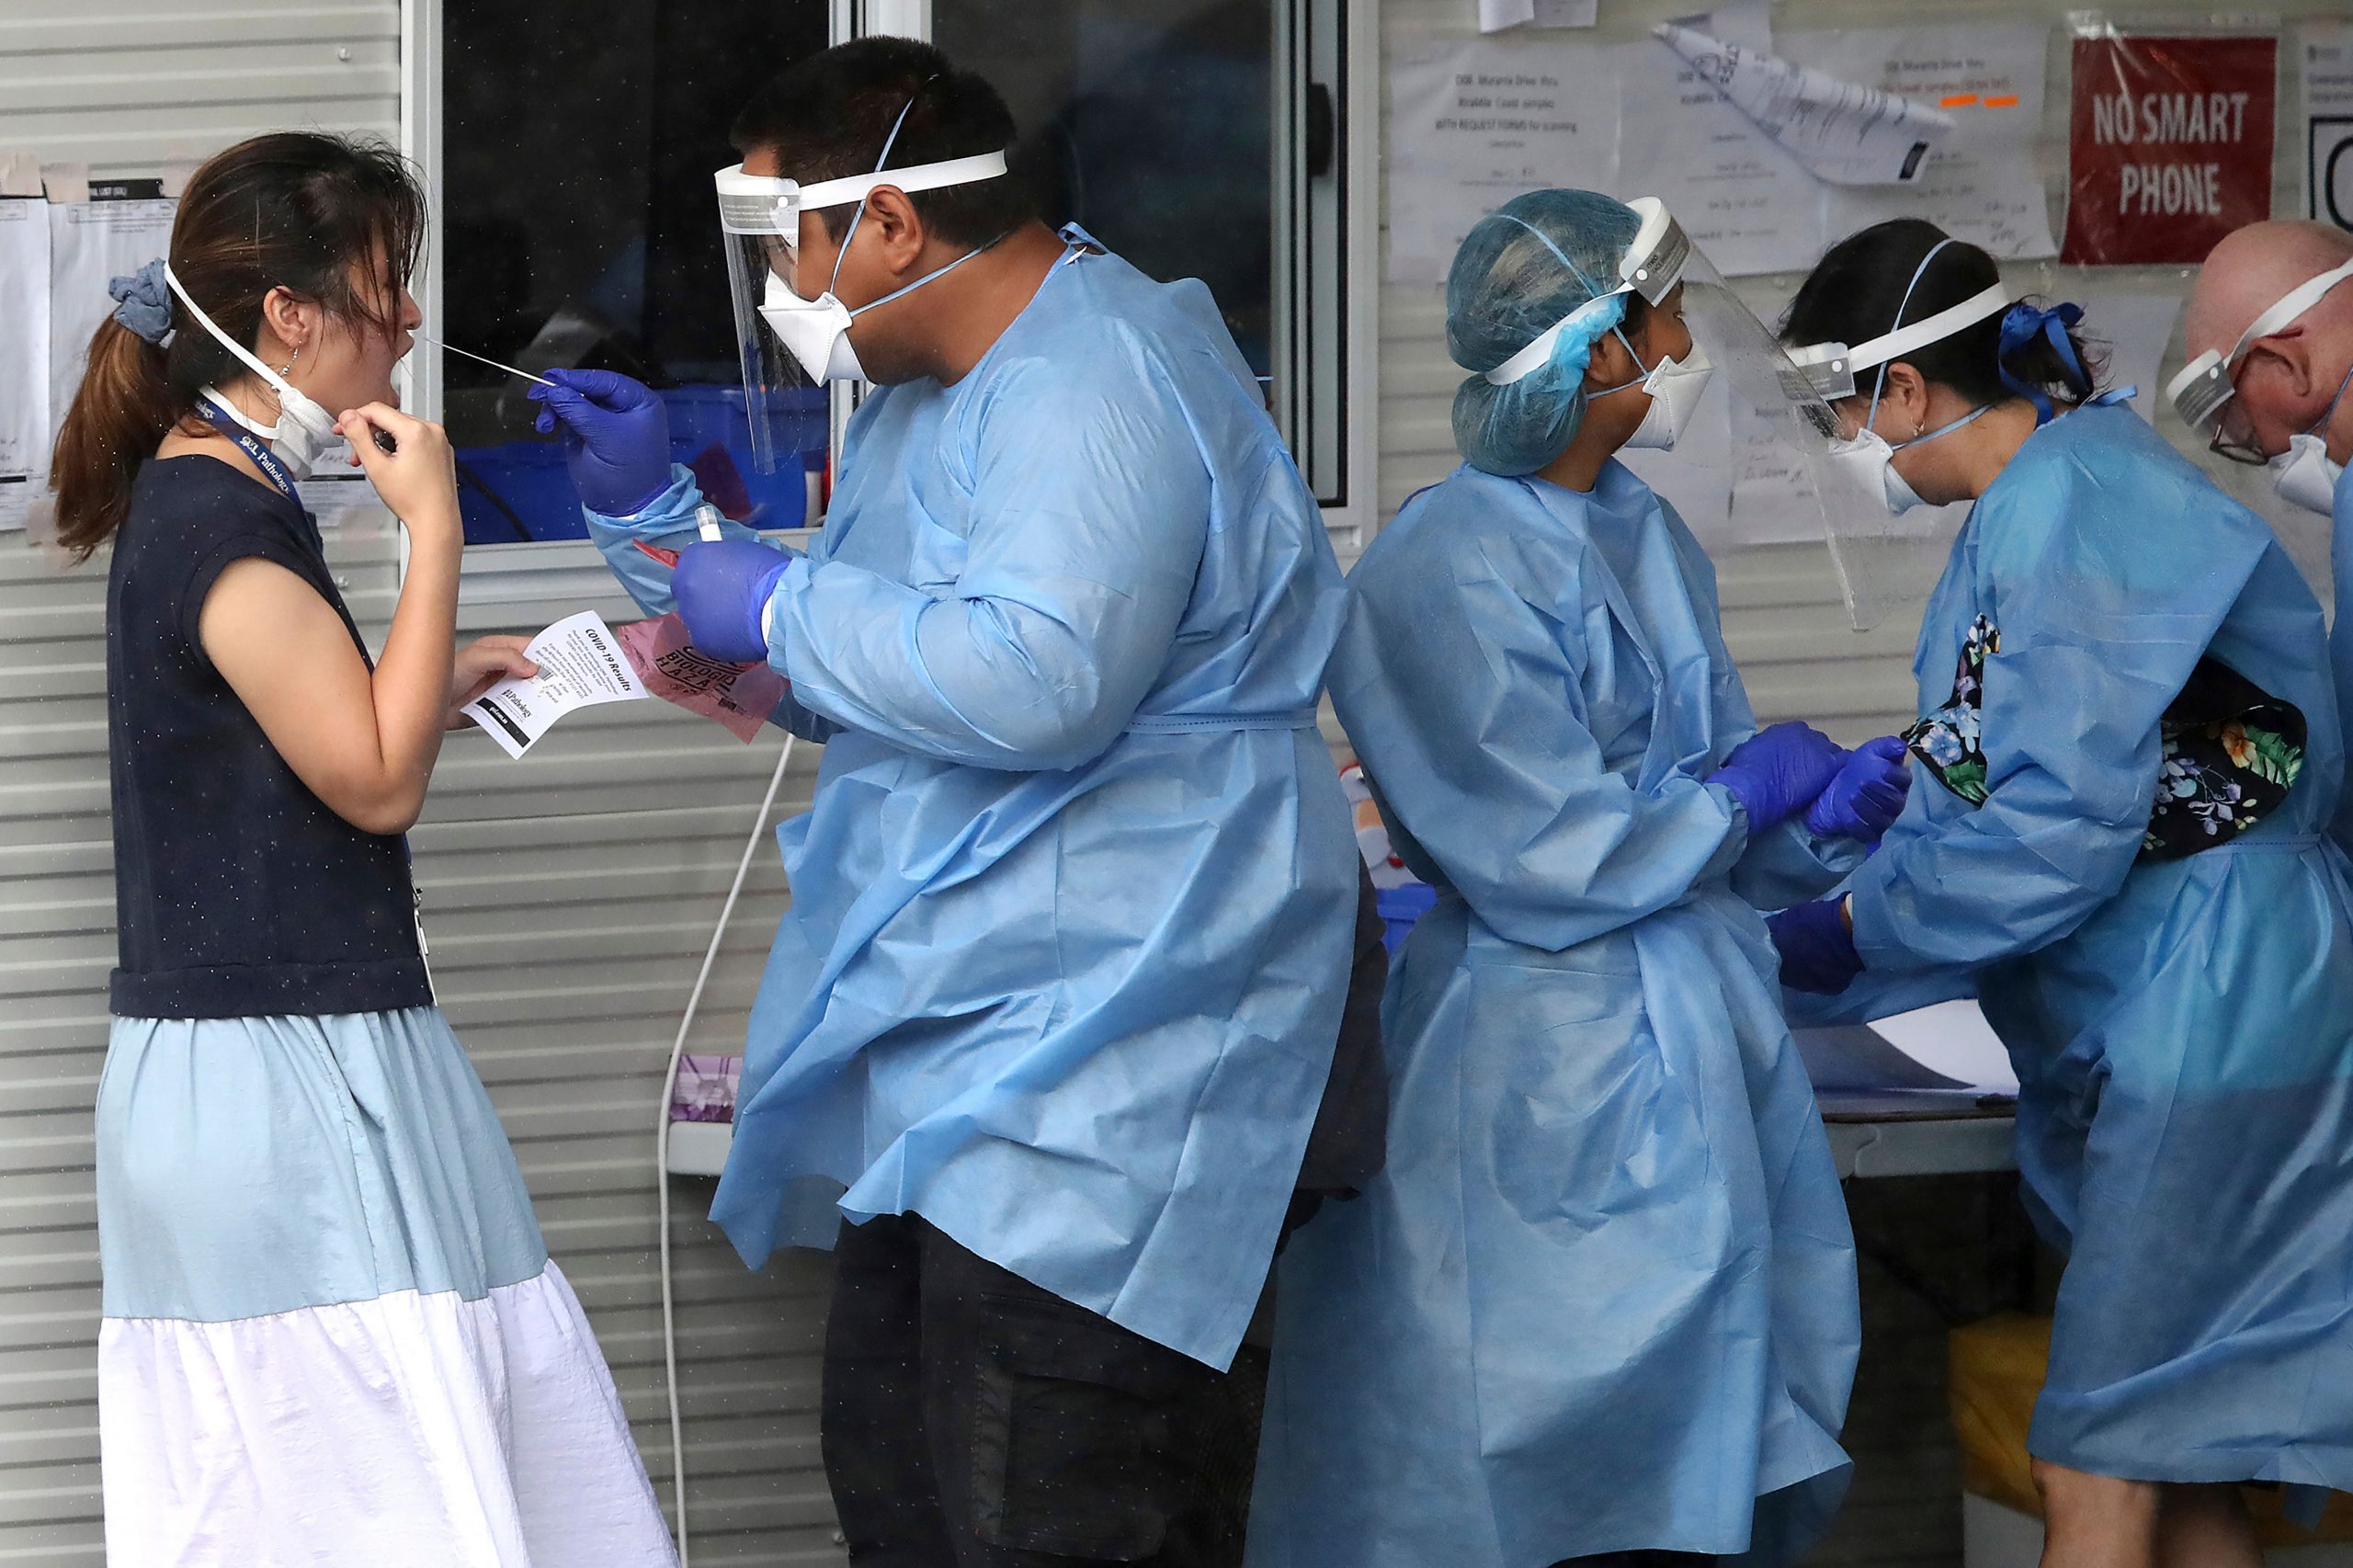 Global COVID-19 deaths stand at 6 million as pandemic enters third year